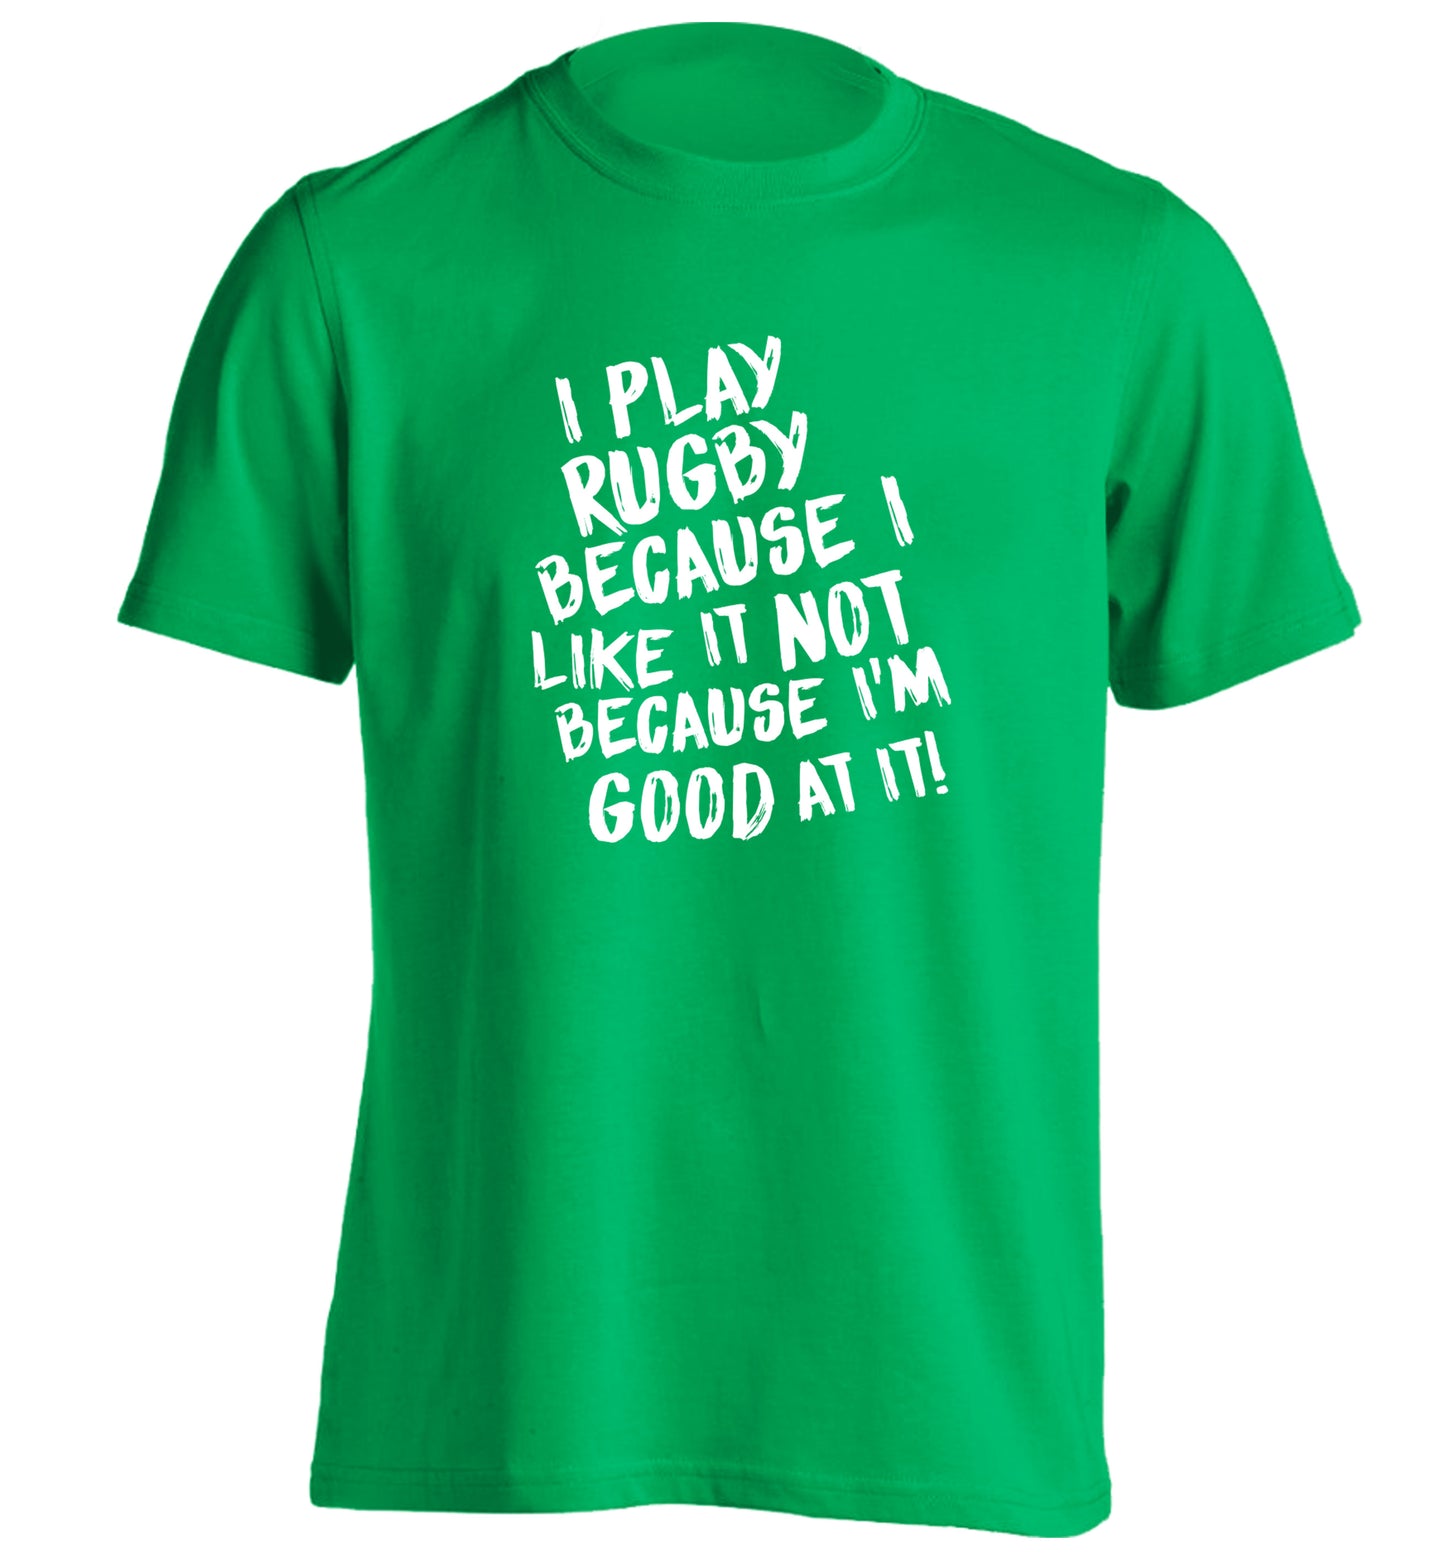 I play rugby because I like it not because I'm good at it adults unisex green Tshirt 2XL